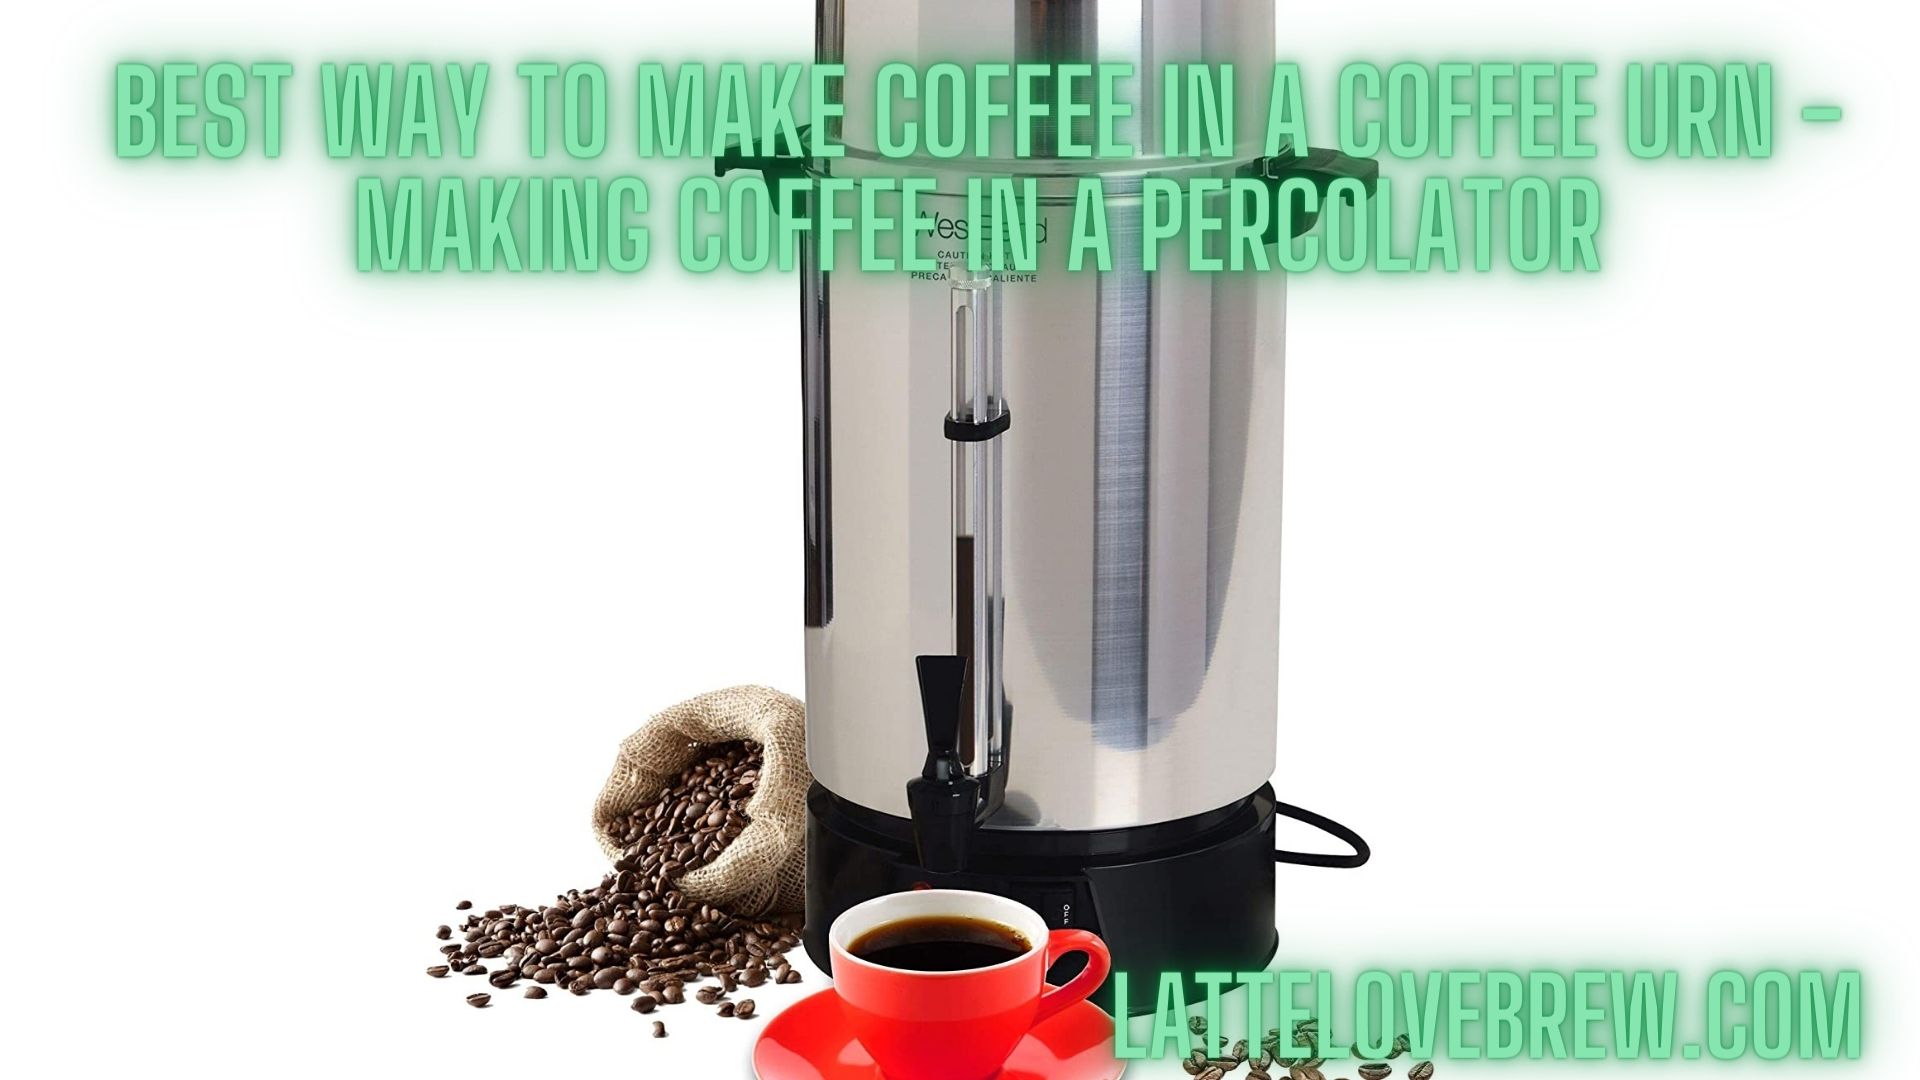 https://lattelovebrew.com/wp-content/uploads/2021/09/Best-Way-To-Make-Coffee-In-A-Coffee-Urn-Making-Coffee-In-A-Percolator.jpg